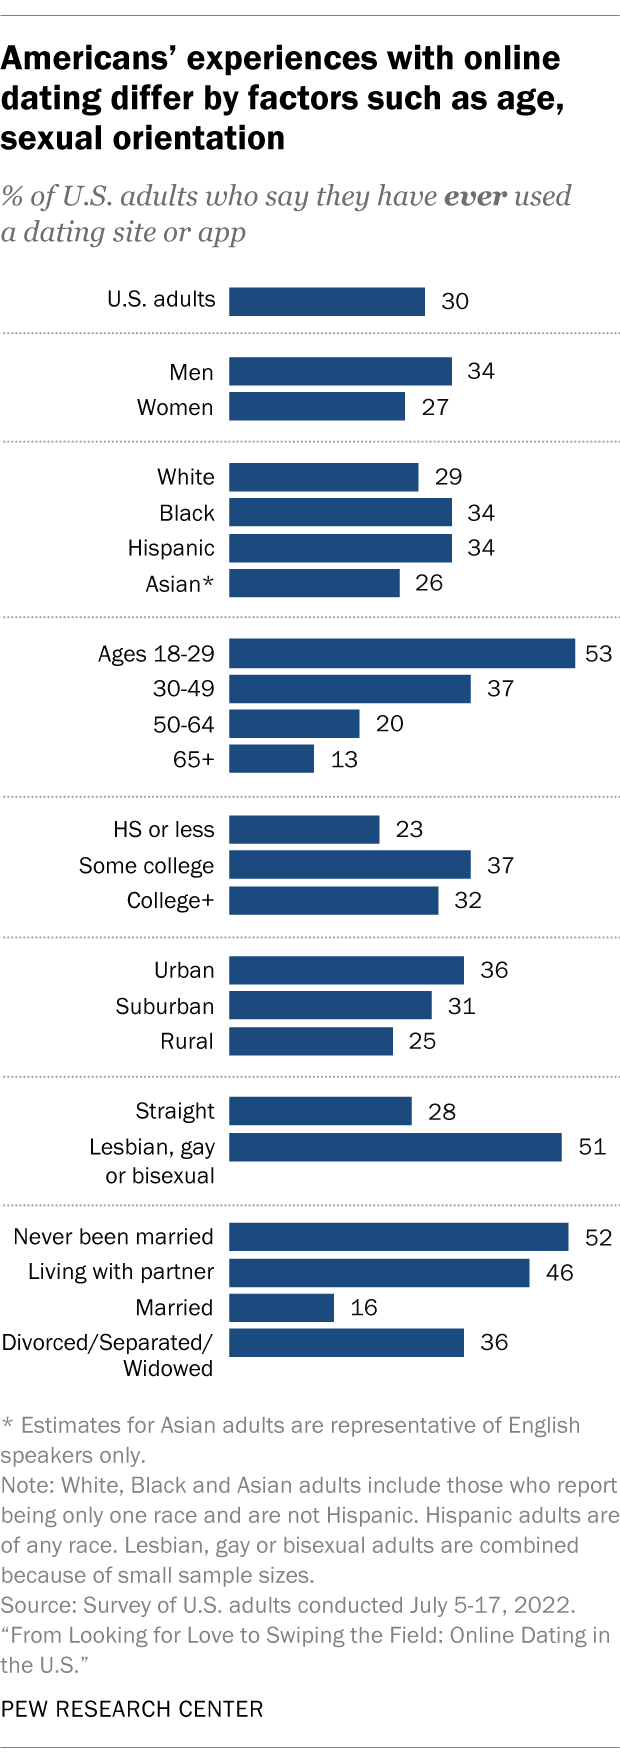 A bar chart showing that Americans' experiences with online dating differ by factors such as age, sexual orientation.